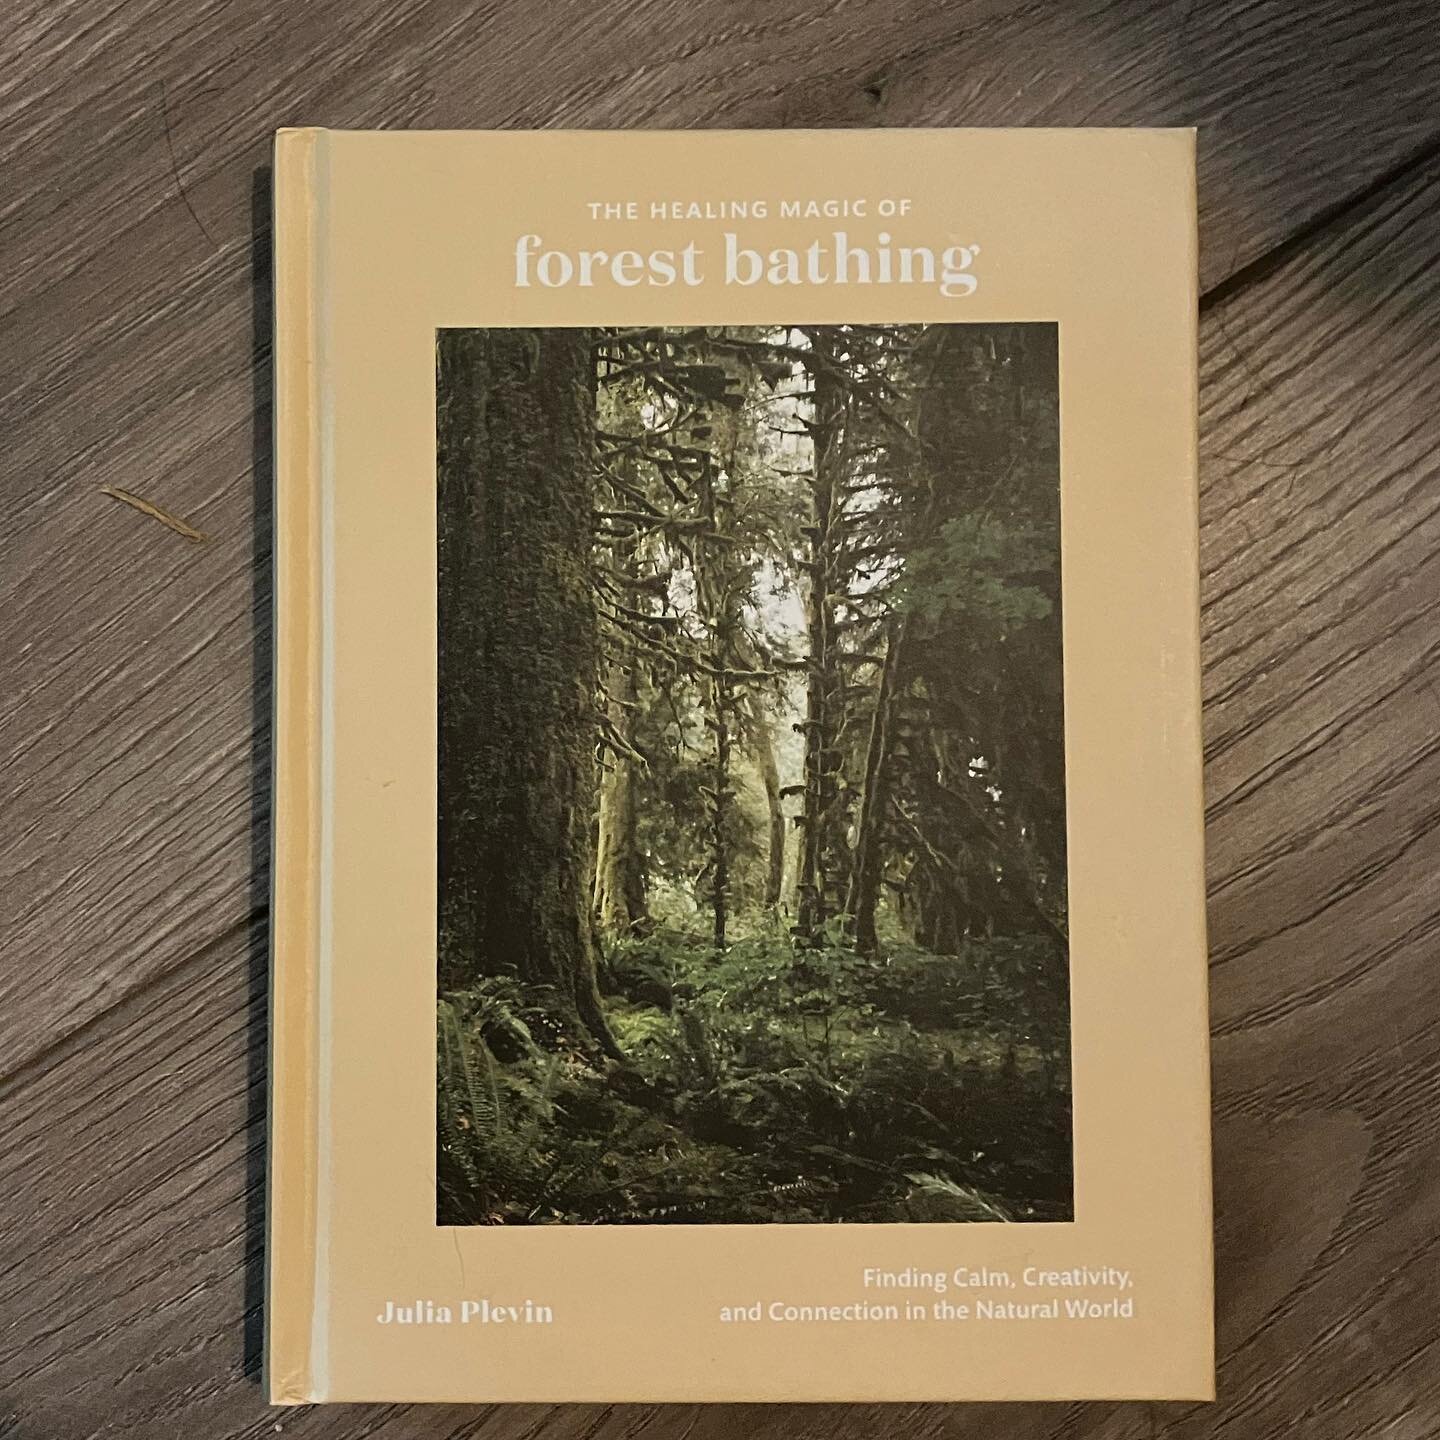 This is a beautiful little book connecting us to #forestbathing. 

#earthmonth #earthmonth2023 #regenerativerelationships #forests #trees #nature #shinrinyoku